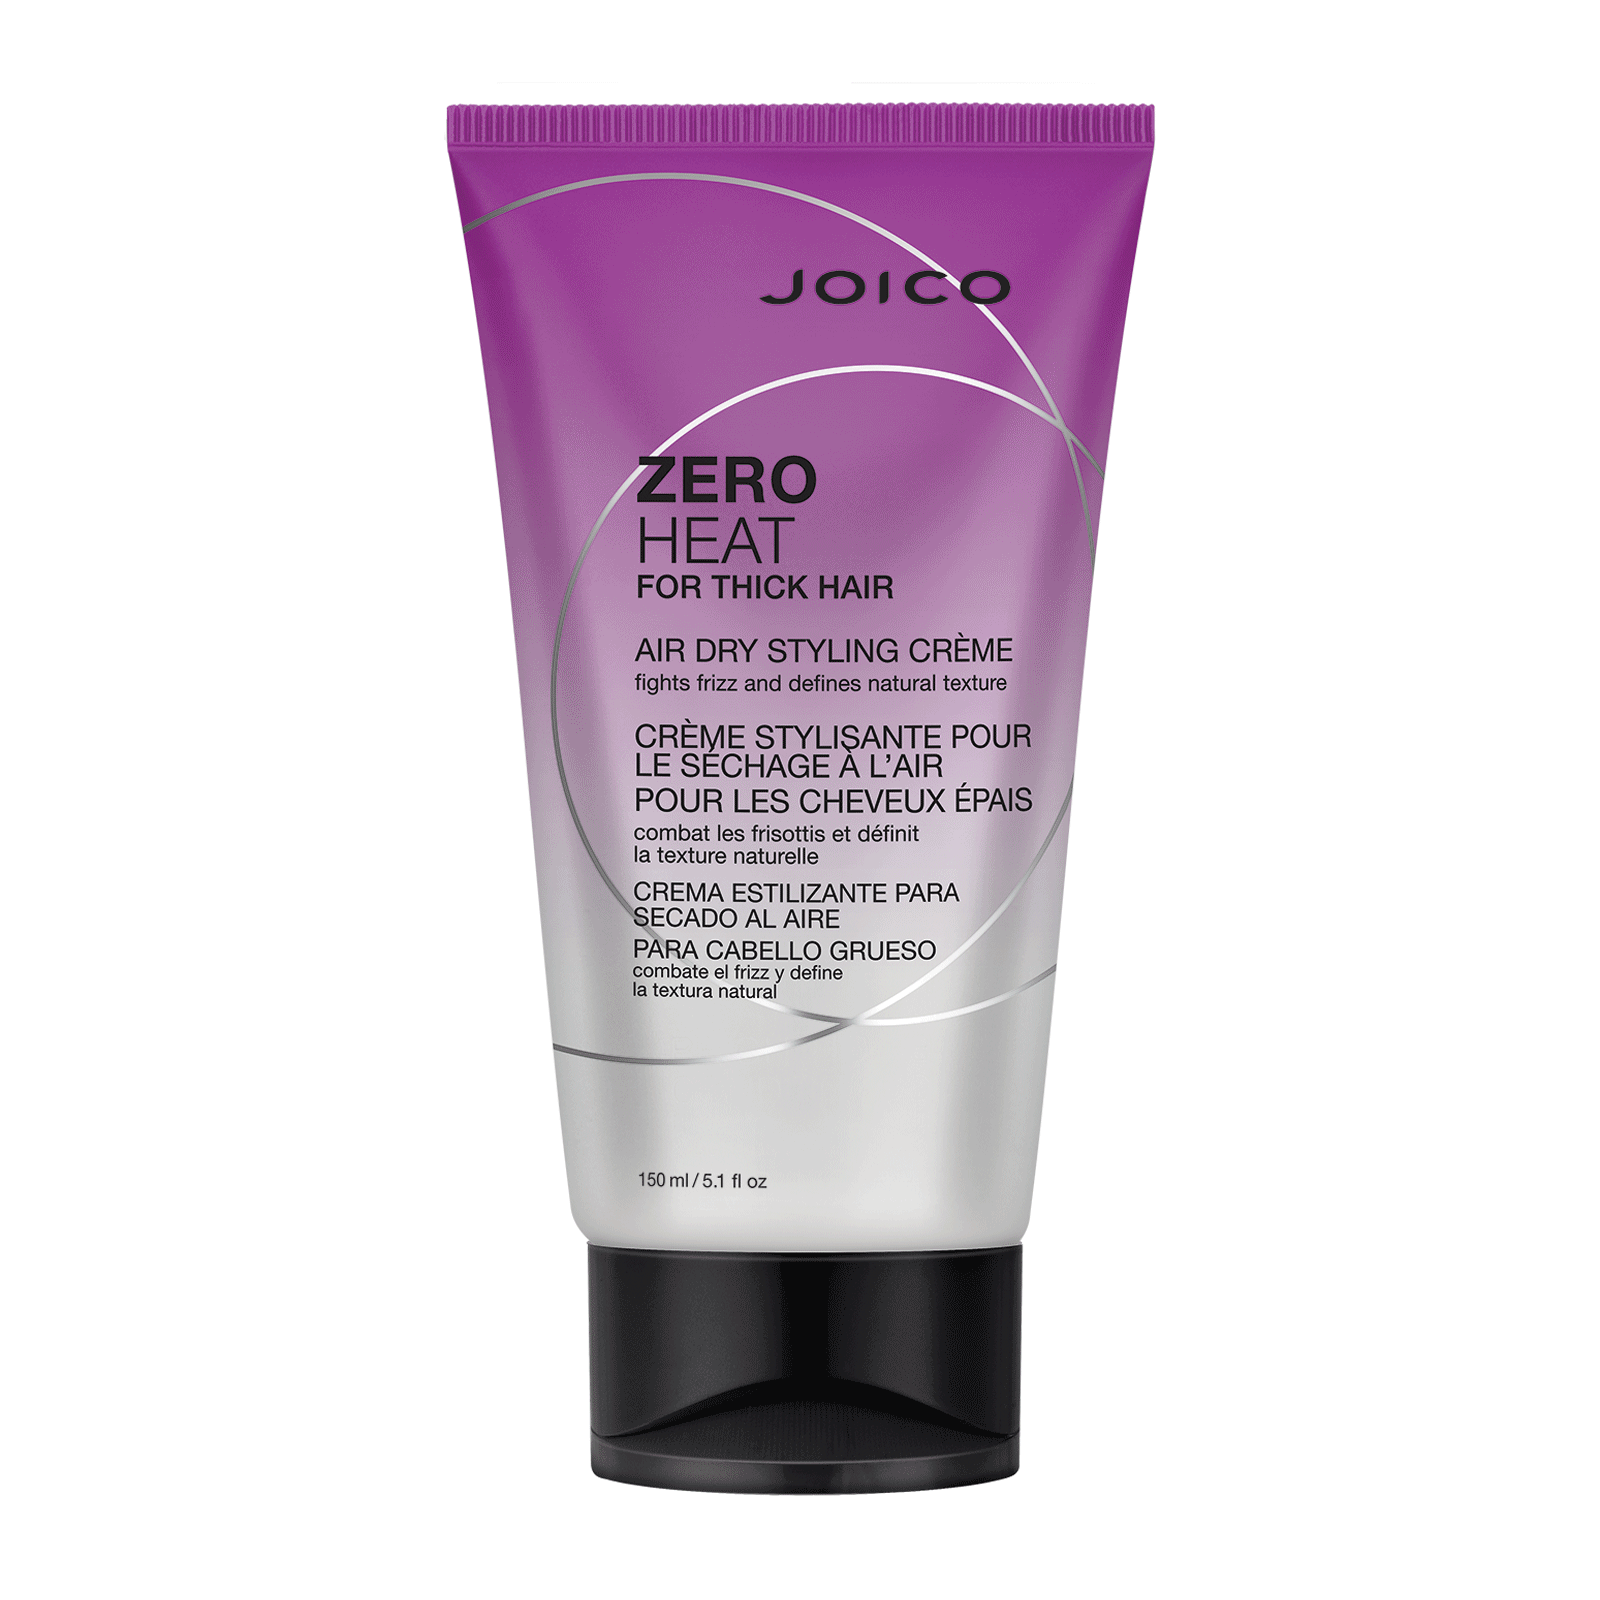 Joico Zero Heat Air Dry Styling Cream for Thick Hair 5.1oz - $33.38